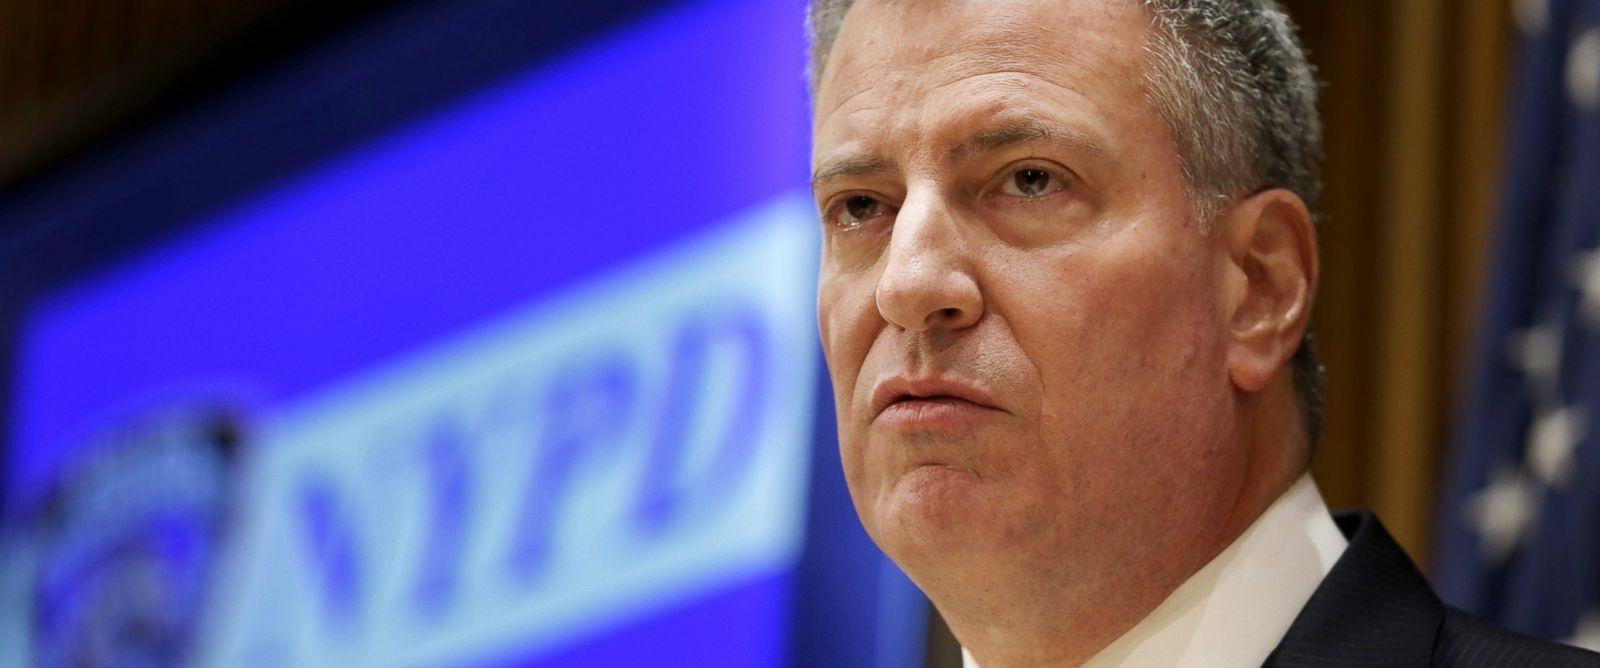 New York Mayor De Blasio Faces Criticism for Joking About ‘CP Time’ With Hillary Clinton